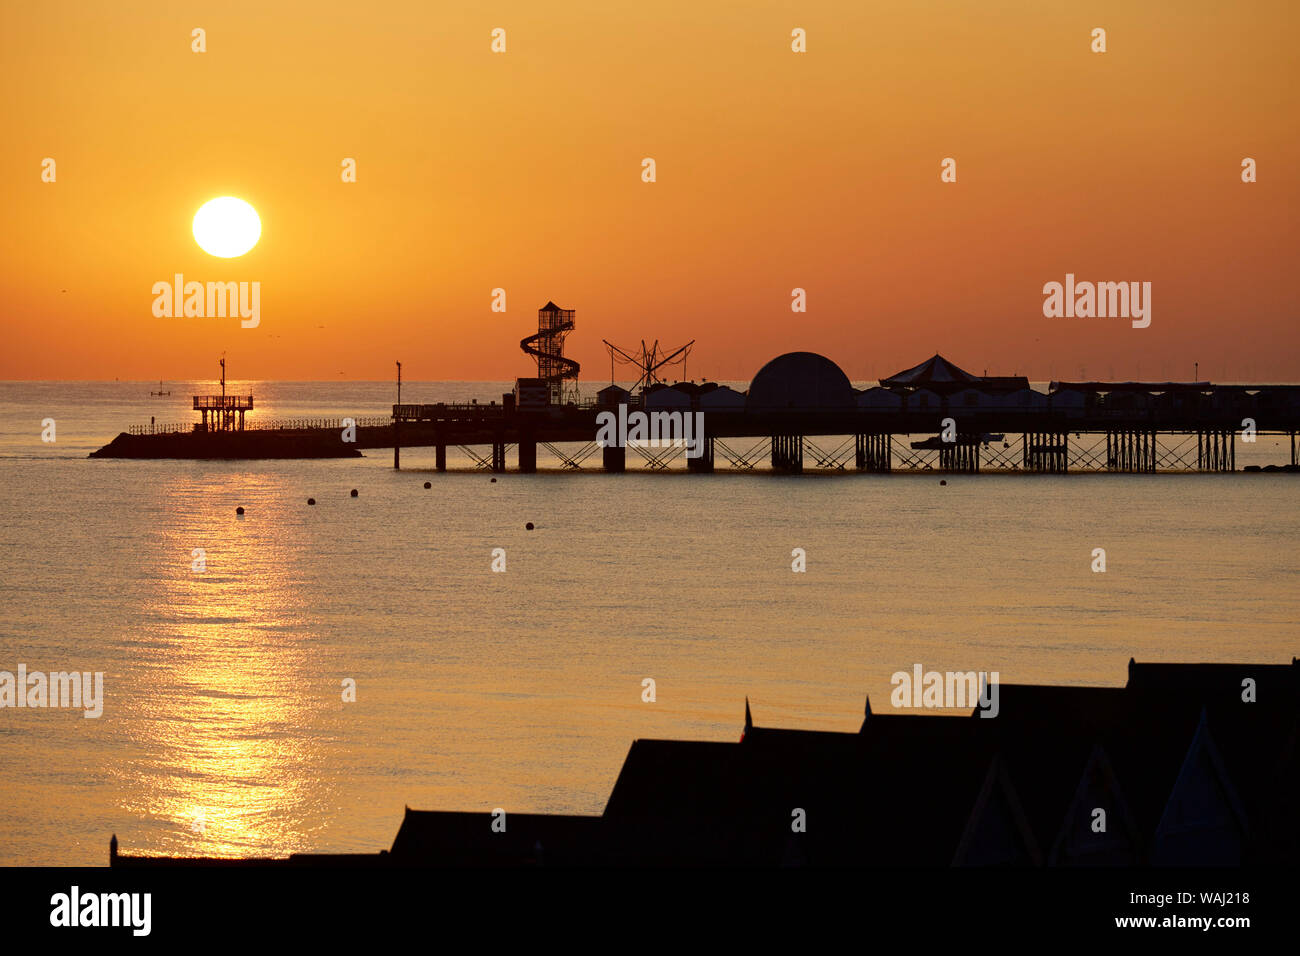 Herne Bay, Kent, UK. 21st August 2019: UK weather. A glorious clear sunrise over Herne Bay pier. Forecasts of high twenties and even early thirties are being made for the bank holiday weekend. Credit: Alan Payton/Alamy Live News Stock Photo